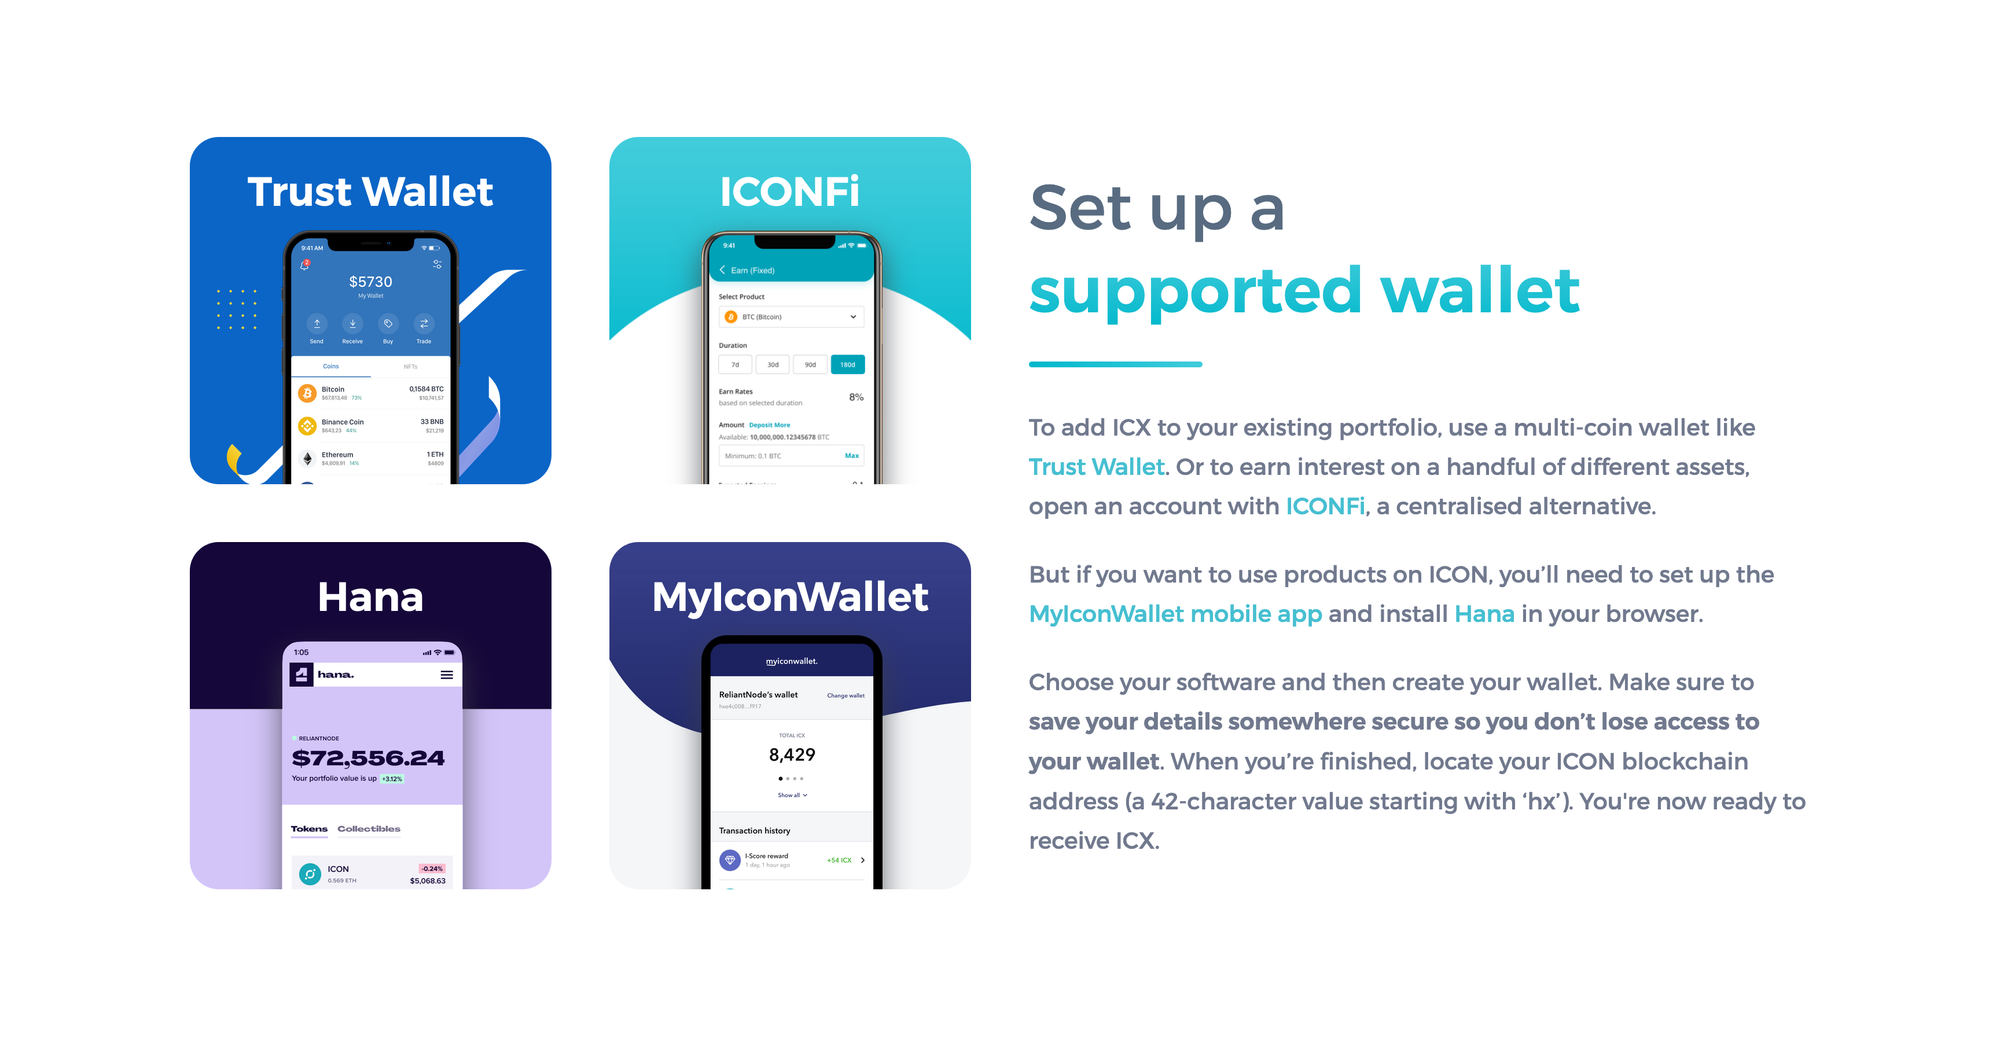 The wallet section on whyicx.com/get-icx.  Set up a supported wallet  To add ICX to your existing portfolio, use a multi-coin wallet like Trust Wallet. Or to earn interest on a handful of different assets, open an account with ICONFi, a centralised alternative.  But if you want to use products on ICON, you’ll need to set up the MyIconWallet mobile app and install Hana in your browser.  Choose your software and then create your wallet. Make sure to save your details somewhere secure so you don’t lose access to your wallet. When you’re finished, locate your ICON blockchain address (a 42-character value starting with ‘hx’). You're now ready to receive ICX.